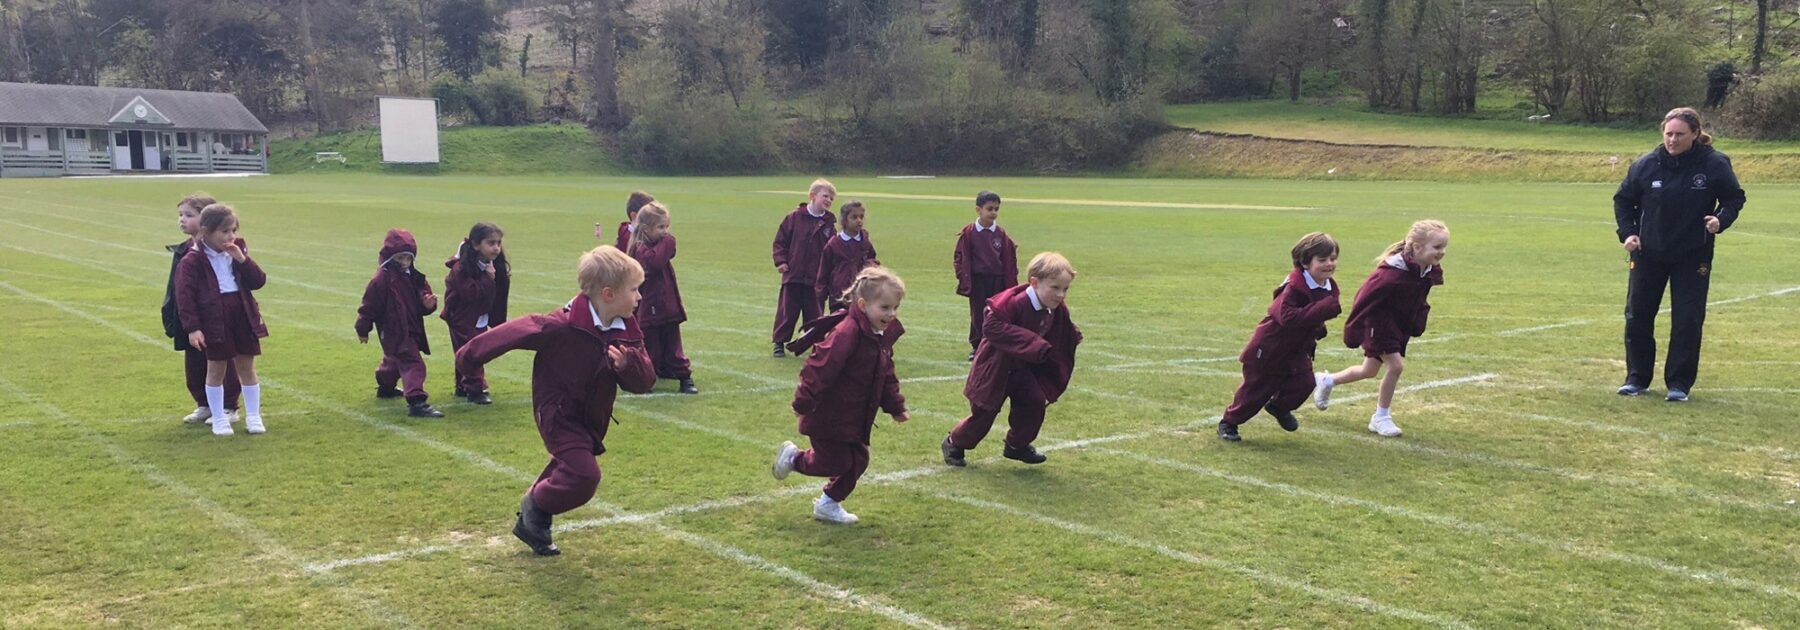 Reception Get to work on Track and Field skills